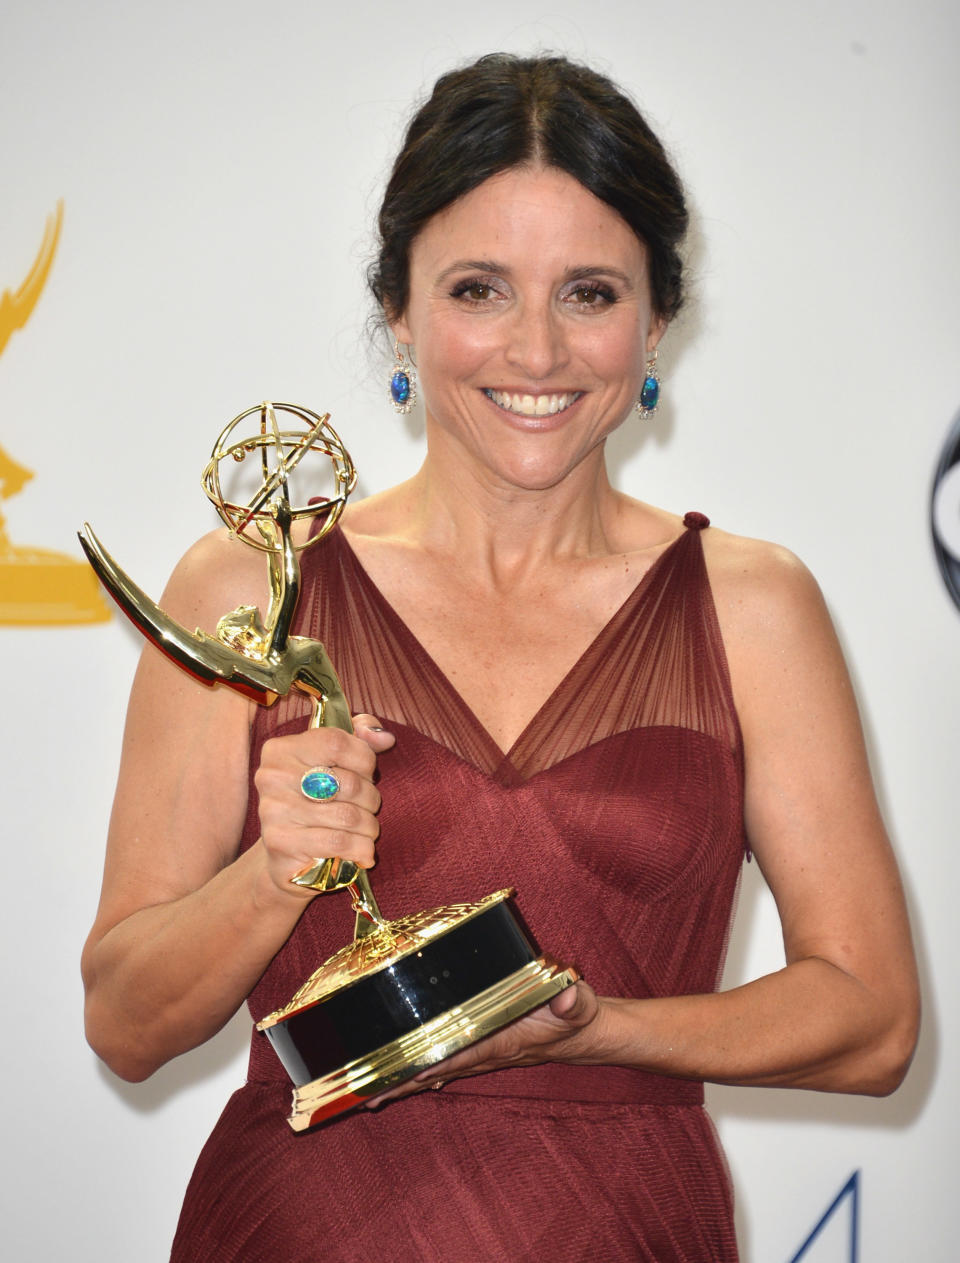 At the 2010 SAG Awards, <a href="http://www.huffingtonpost.com/2010/01/23/julia-louis-dreyfus-shows_n_434380.html">Louis-Dreyfus told Giuliana Rancic</a> how she looks so good on the red carpet: "You gotta have Spanx. Keep the spanx on and it will all work out!" 